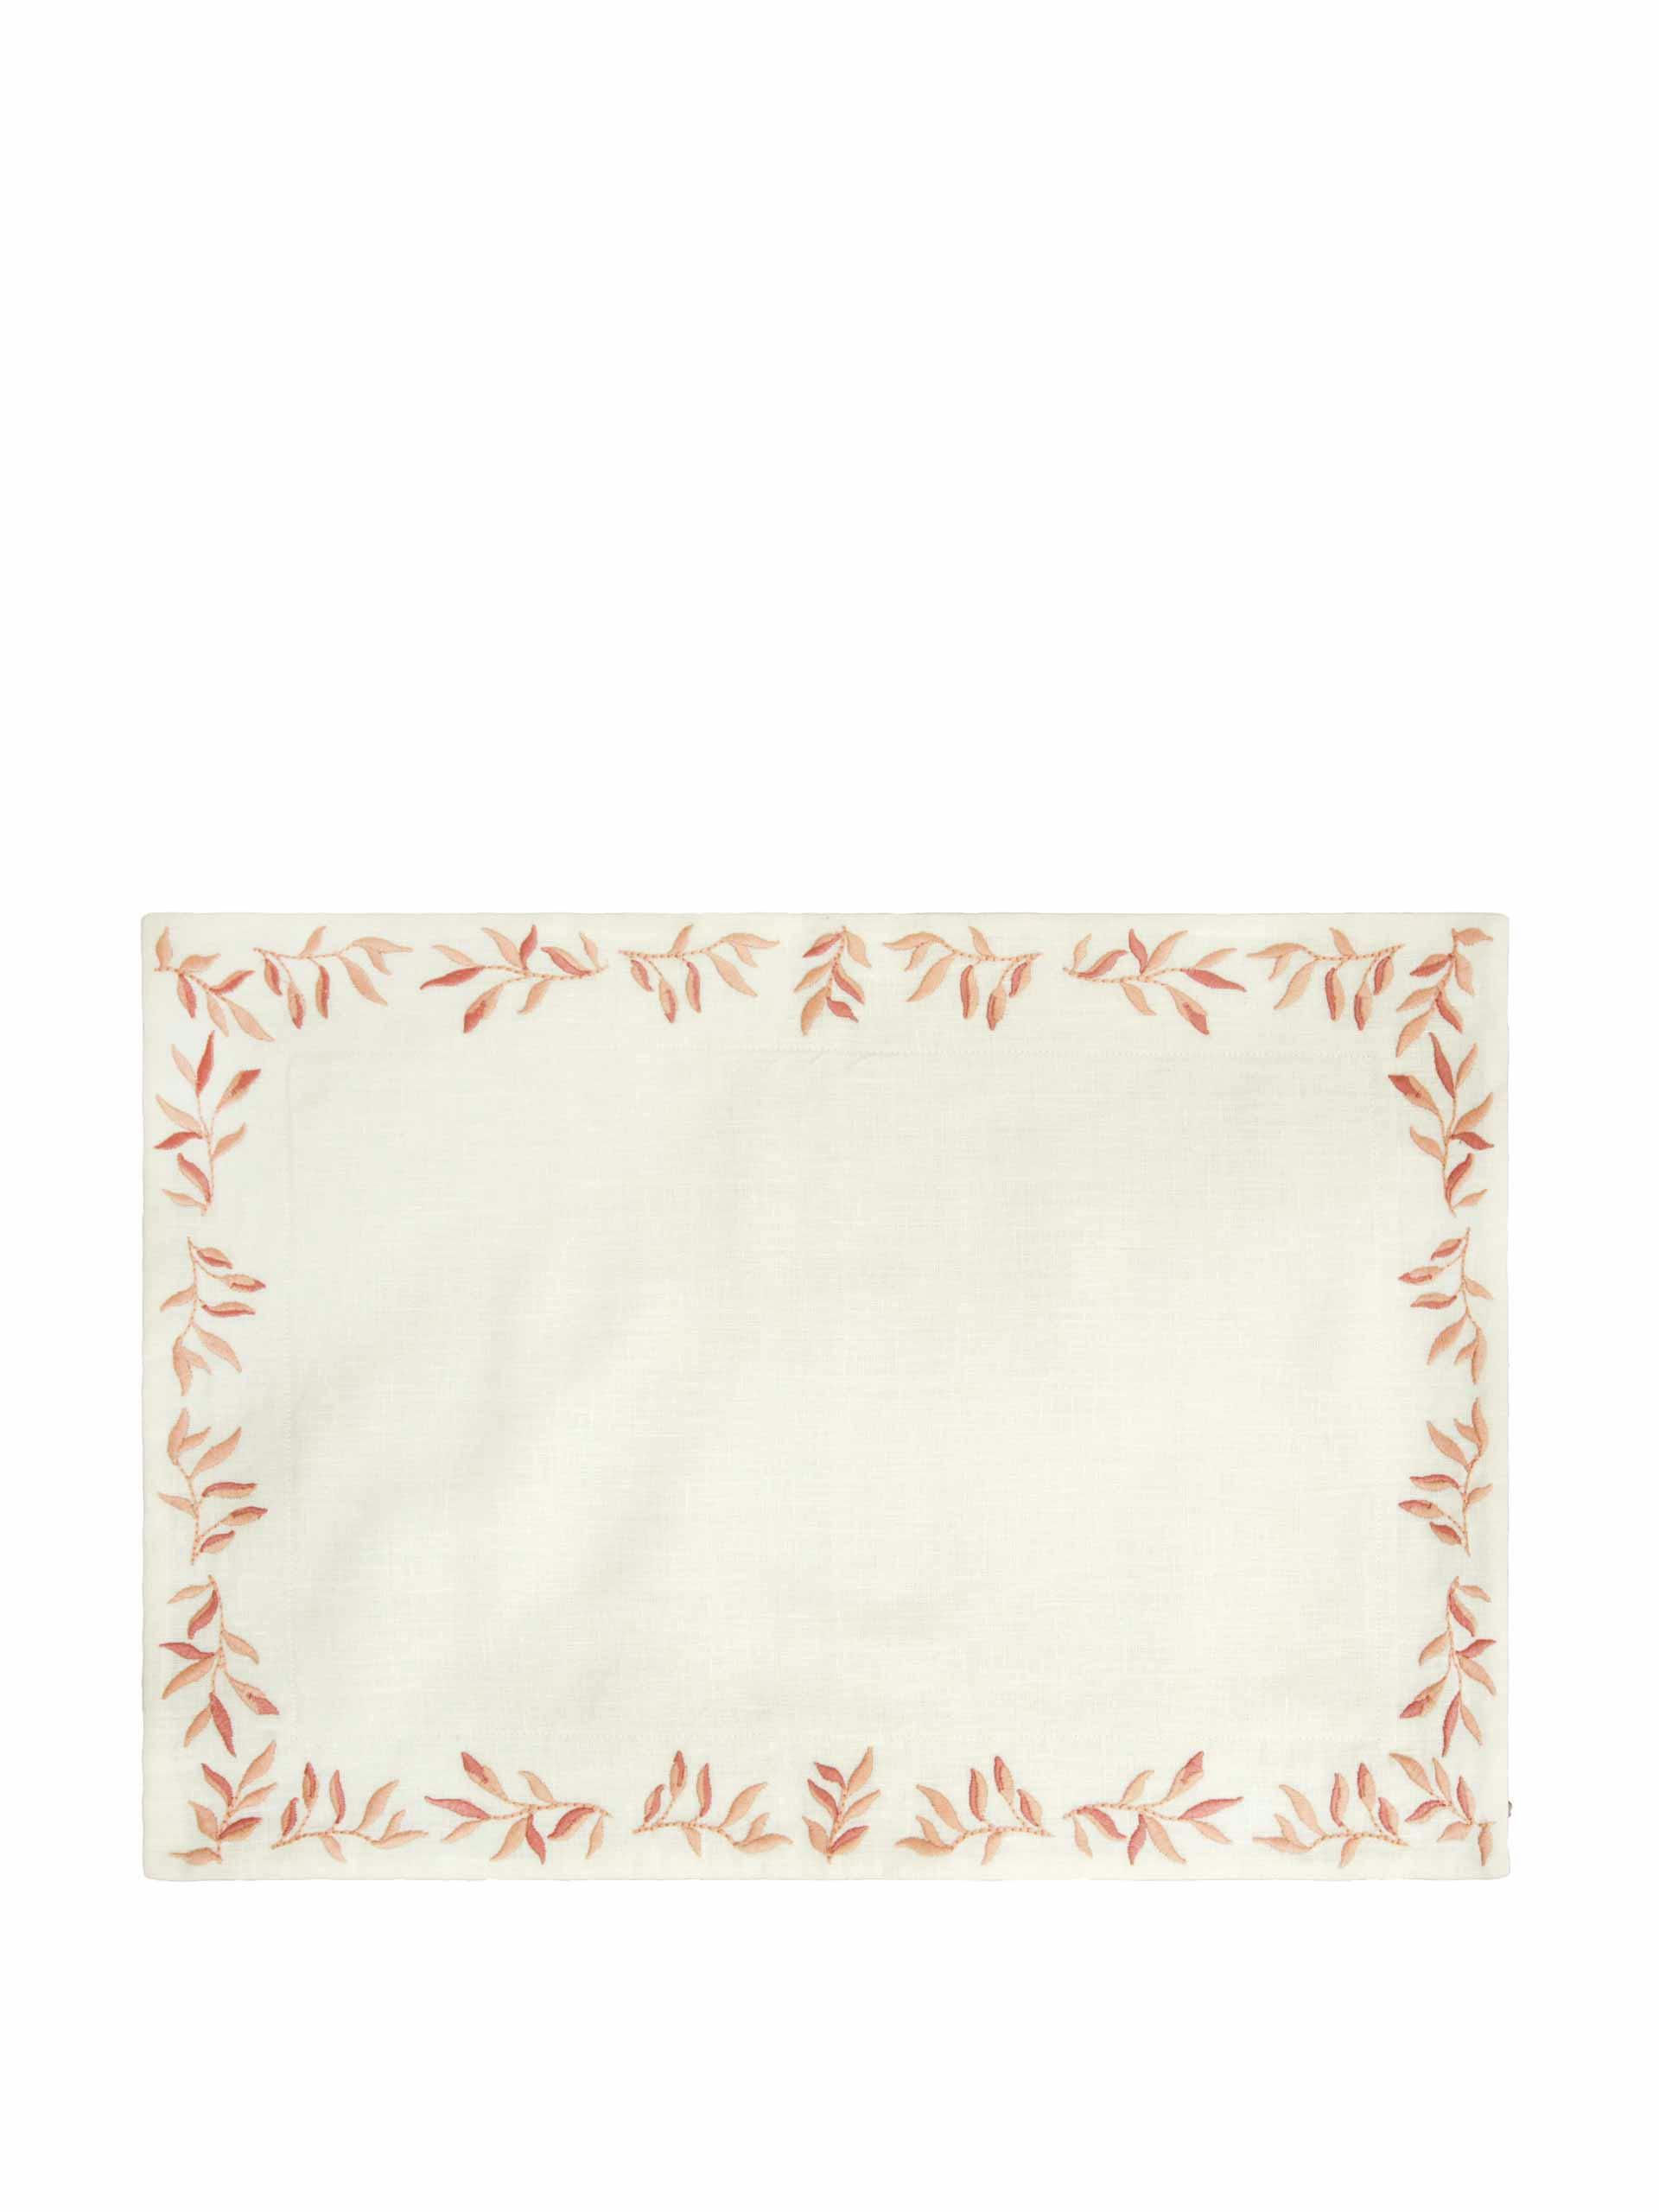 Foliage embroidered linen placemats